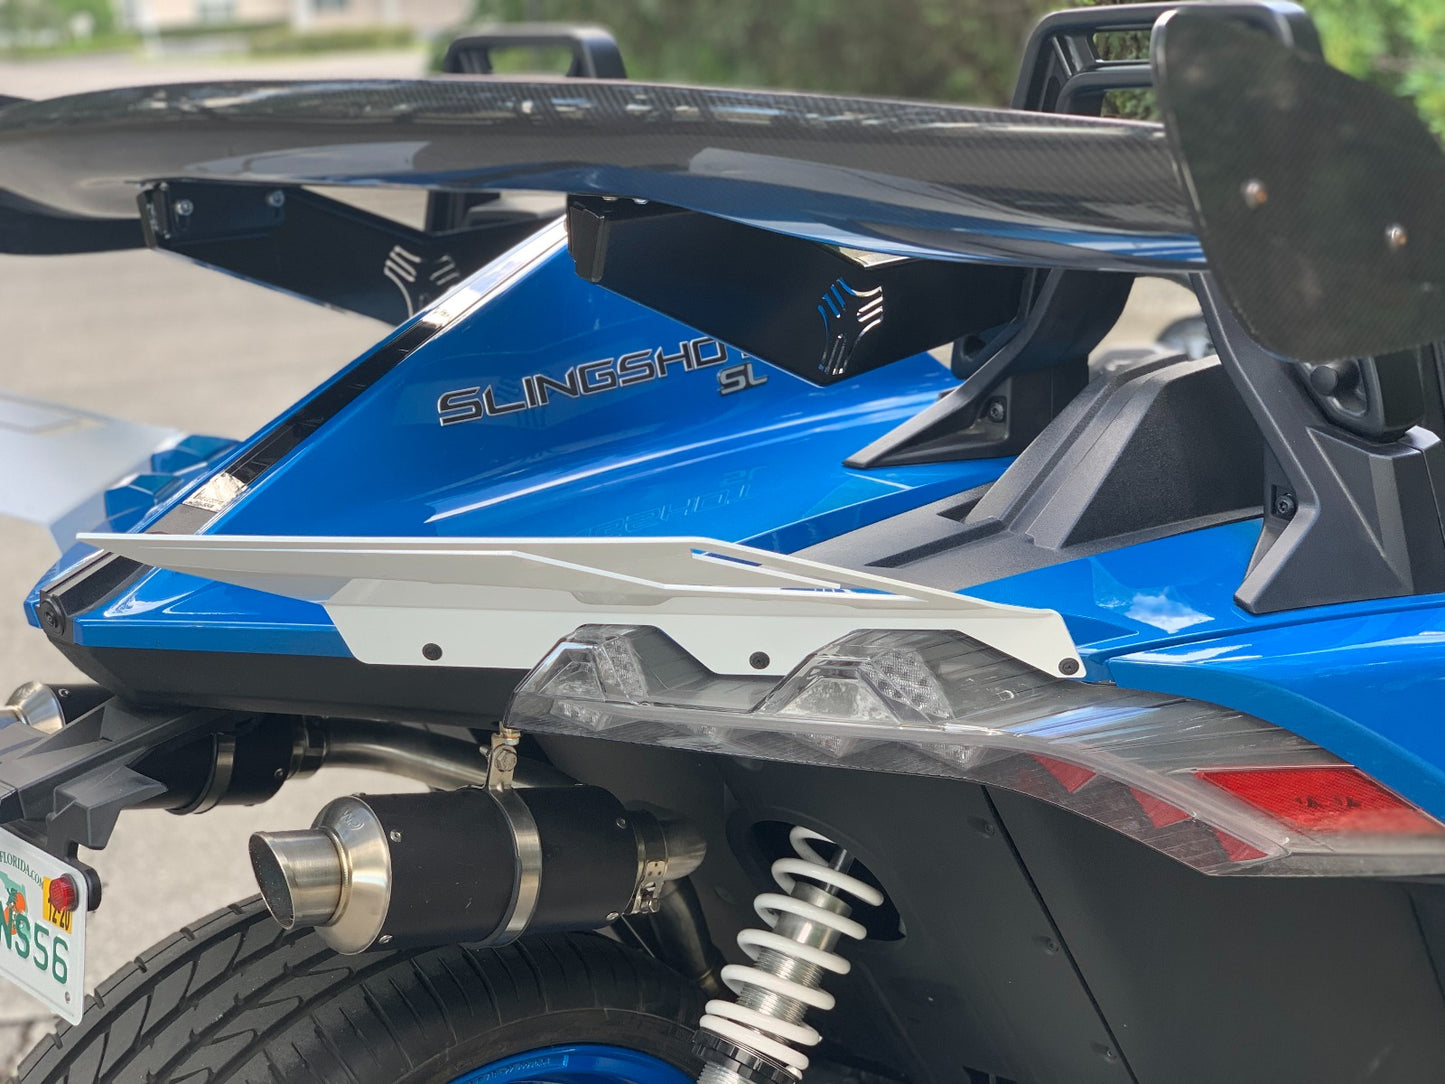 TWIST DYNAMICS REAR WING KIT FOR THE POLARIS SLINGSHOT - LARGE CARBON FIBER WING WITH BRACKETS 2017+ Square hoops only